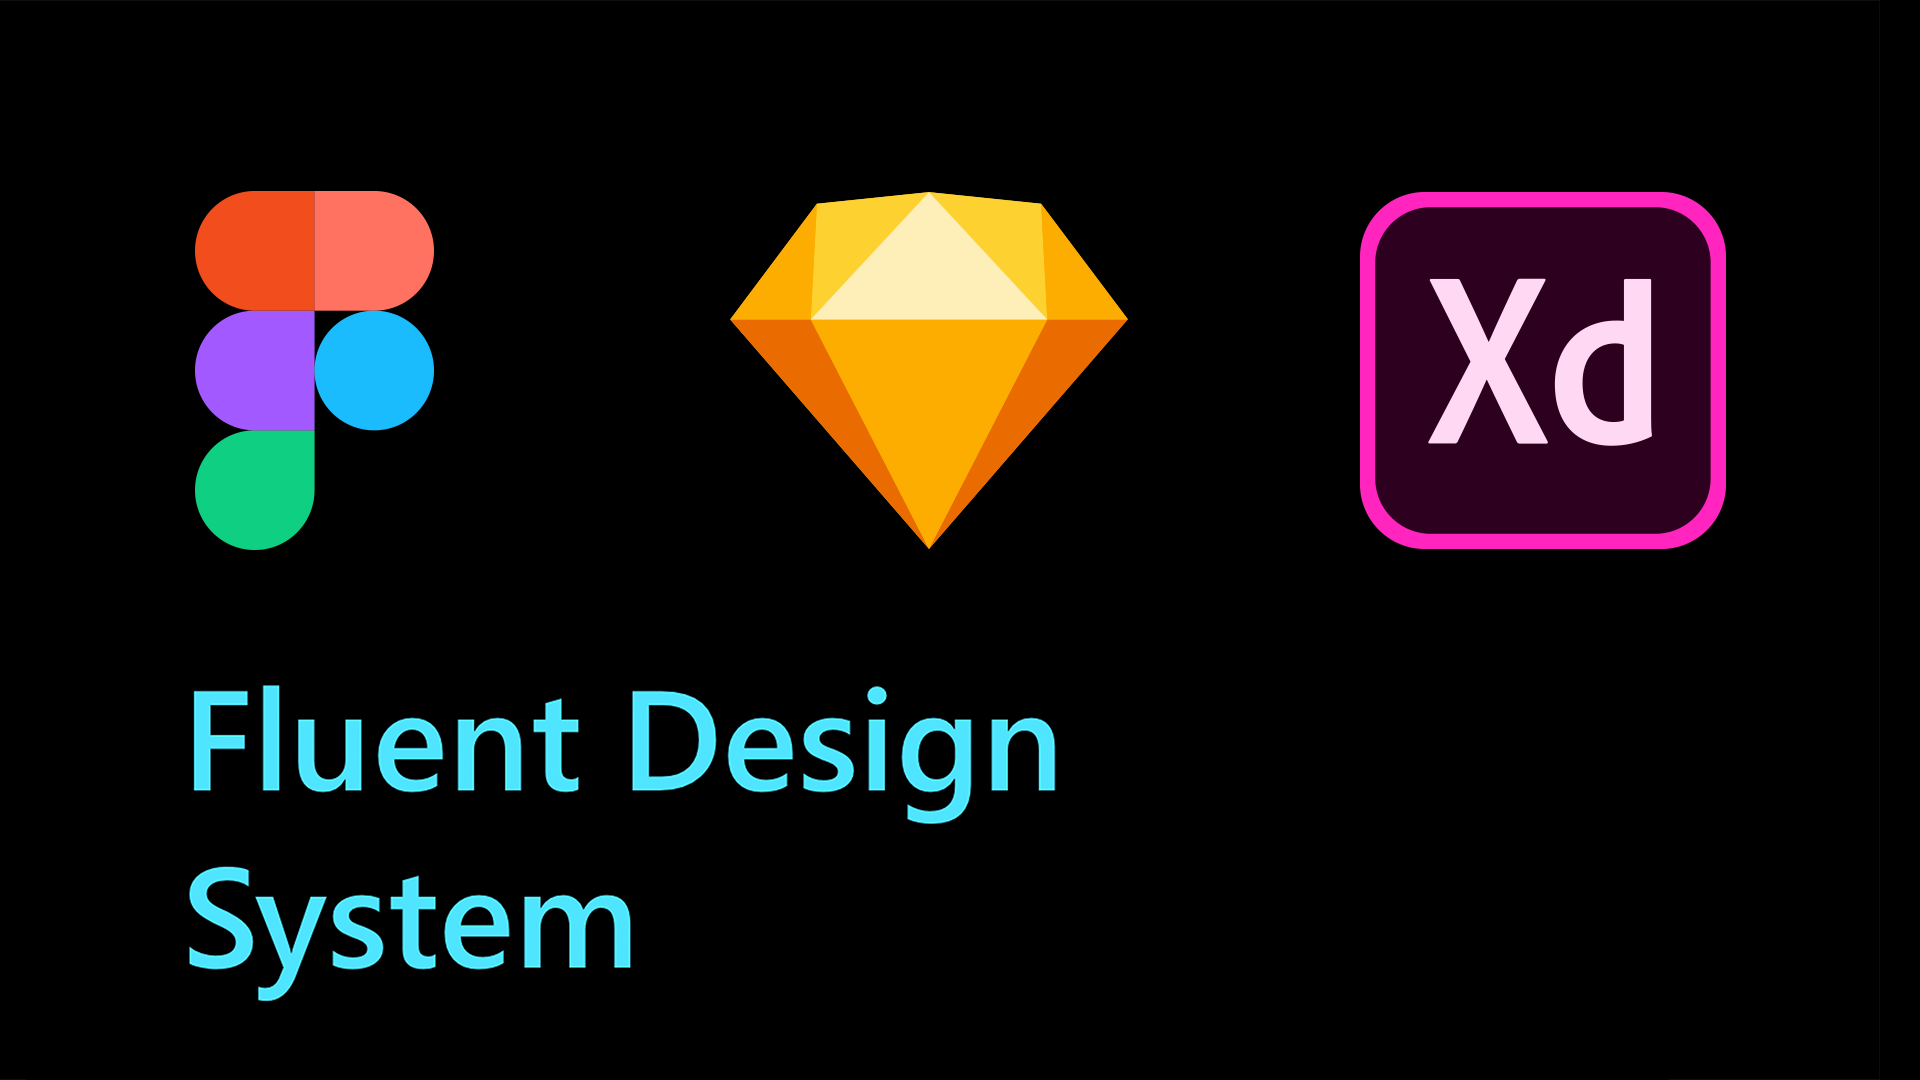 Fluent Design Material icon by Sketch on Behance